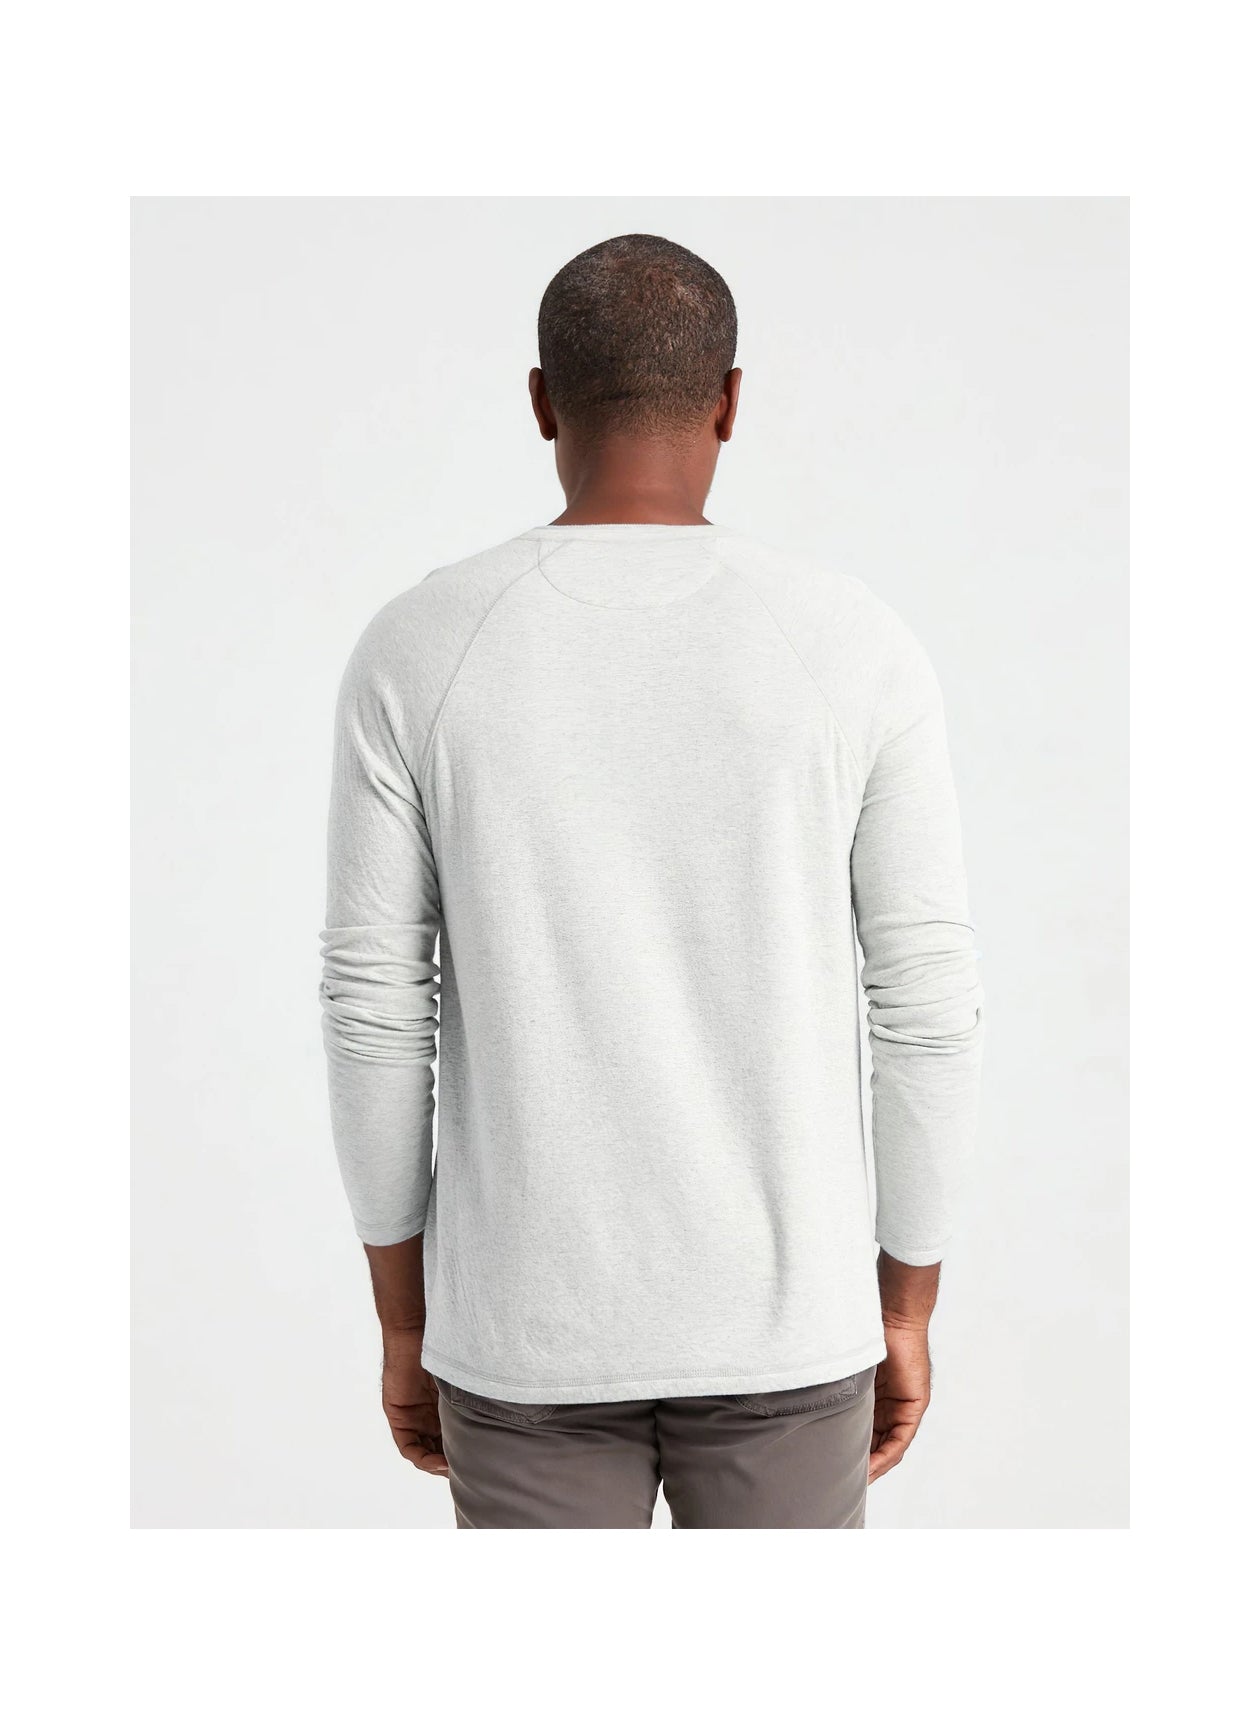 Faherty Men's Cloud Long Sleeve Henley, Ivory Heather, White, S at